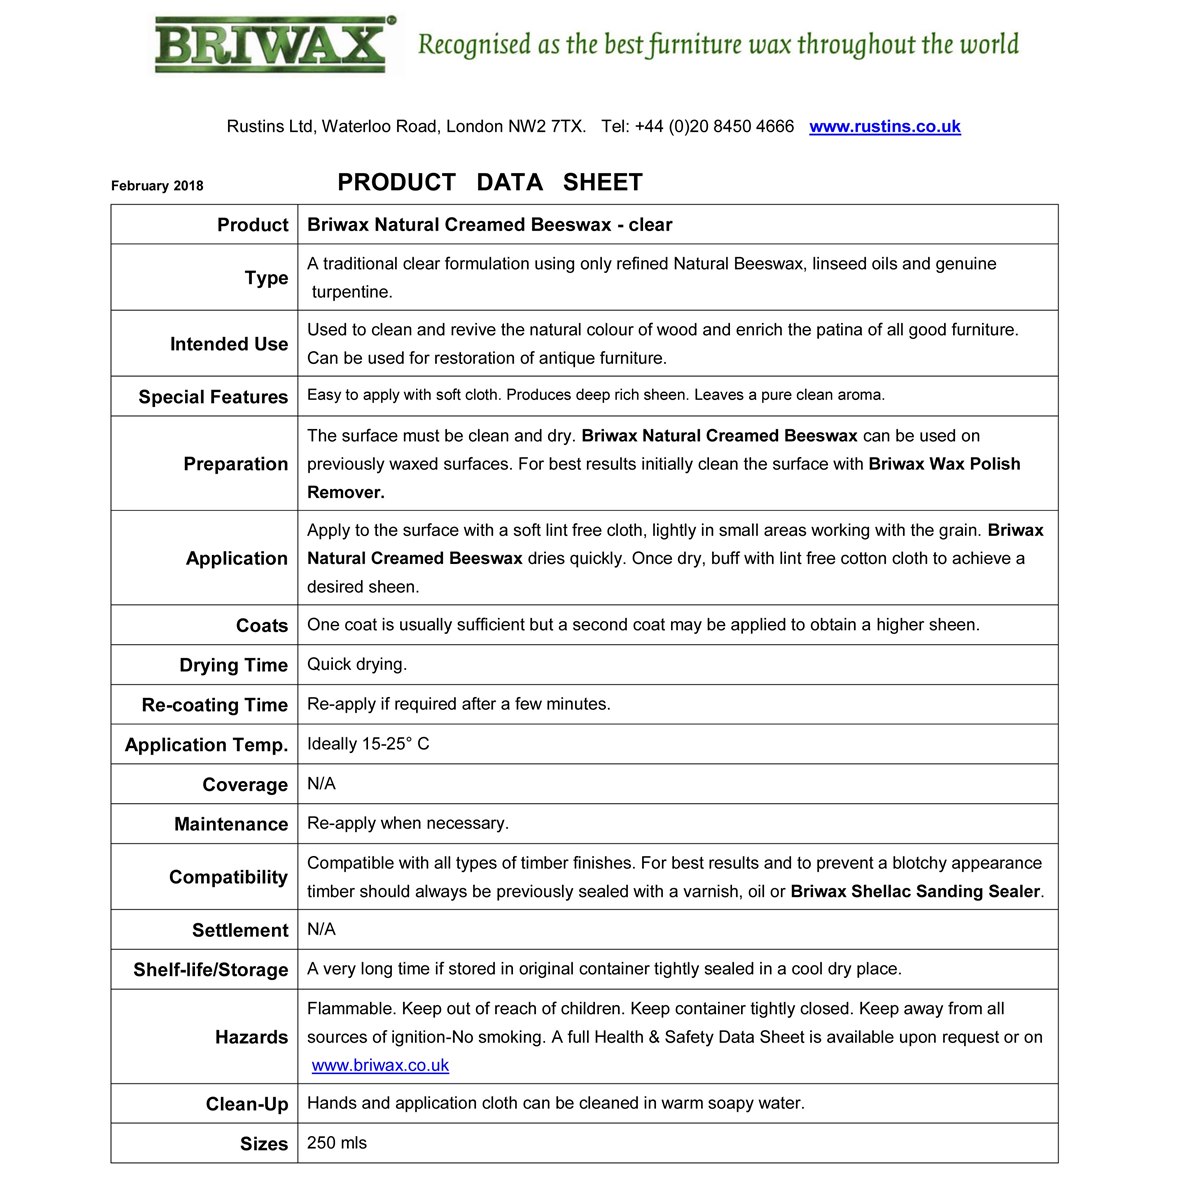 Briwax Creamed Beeswax usage instructions